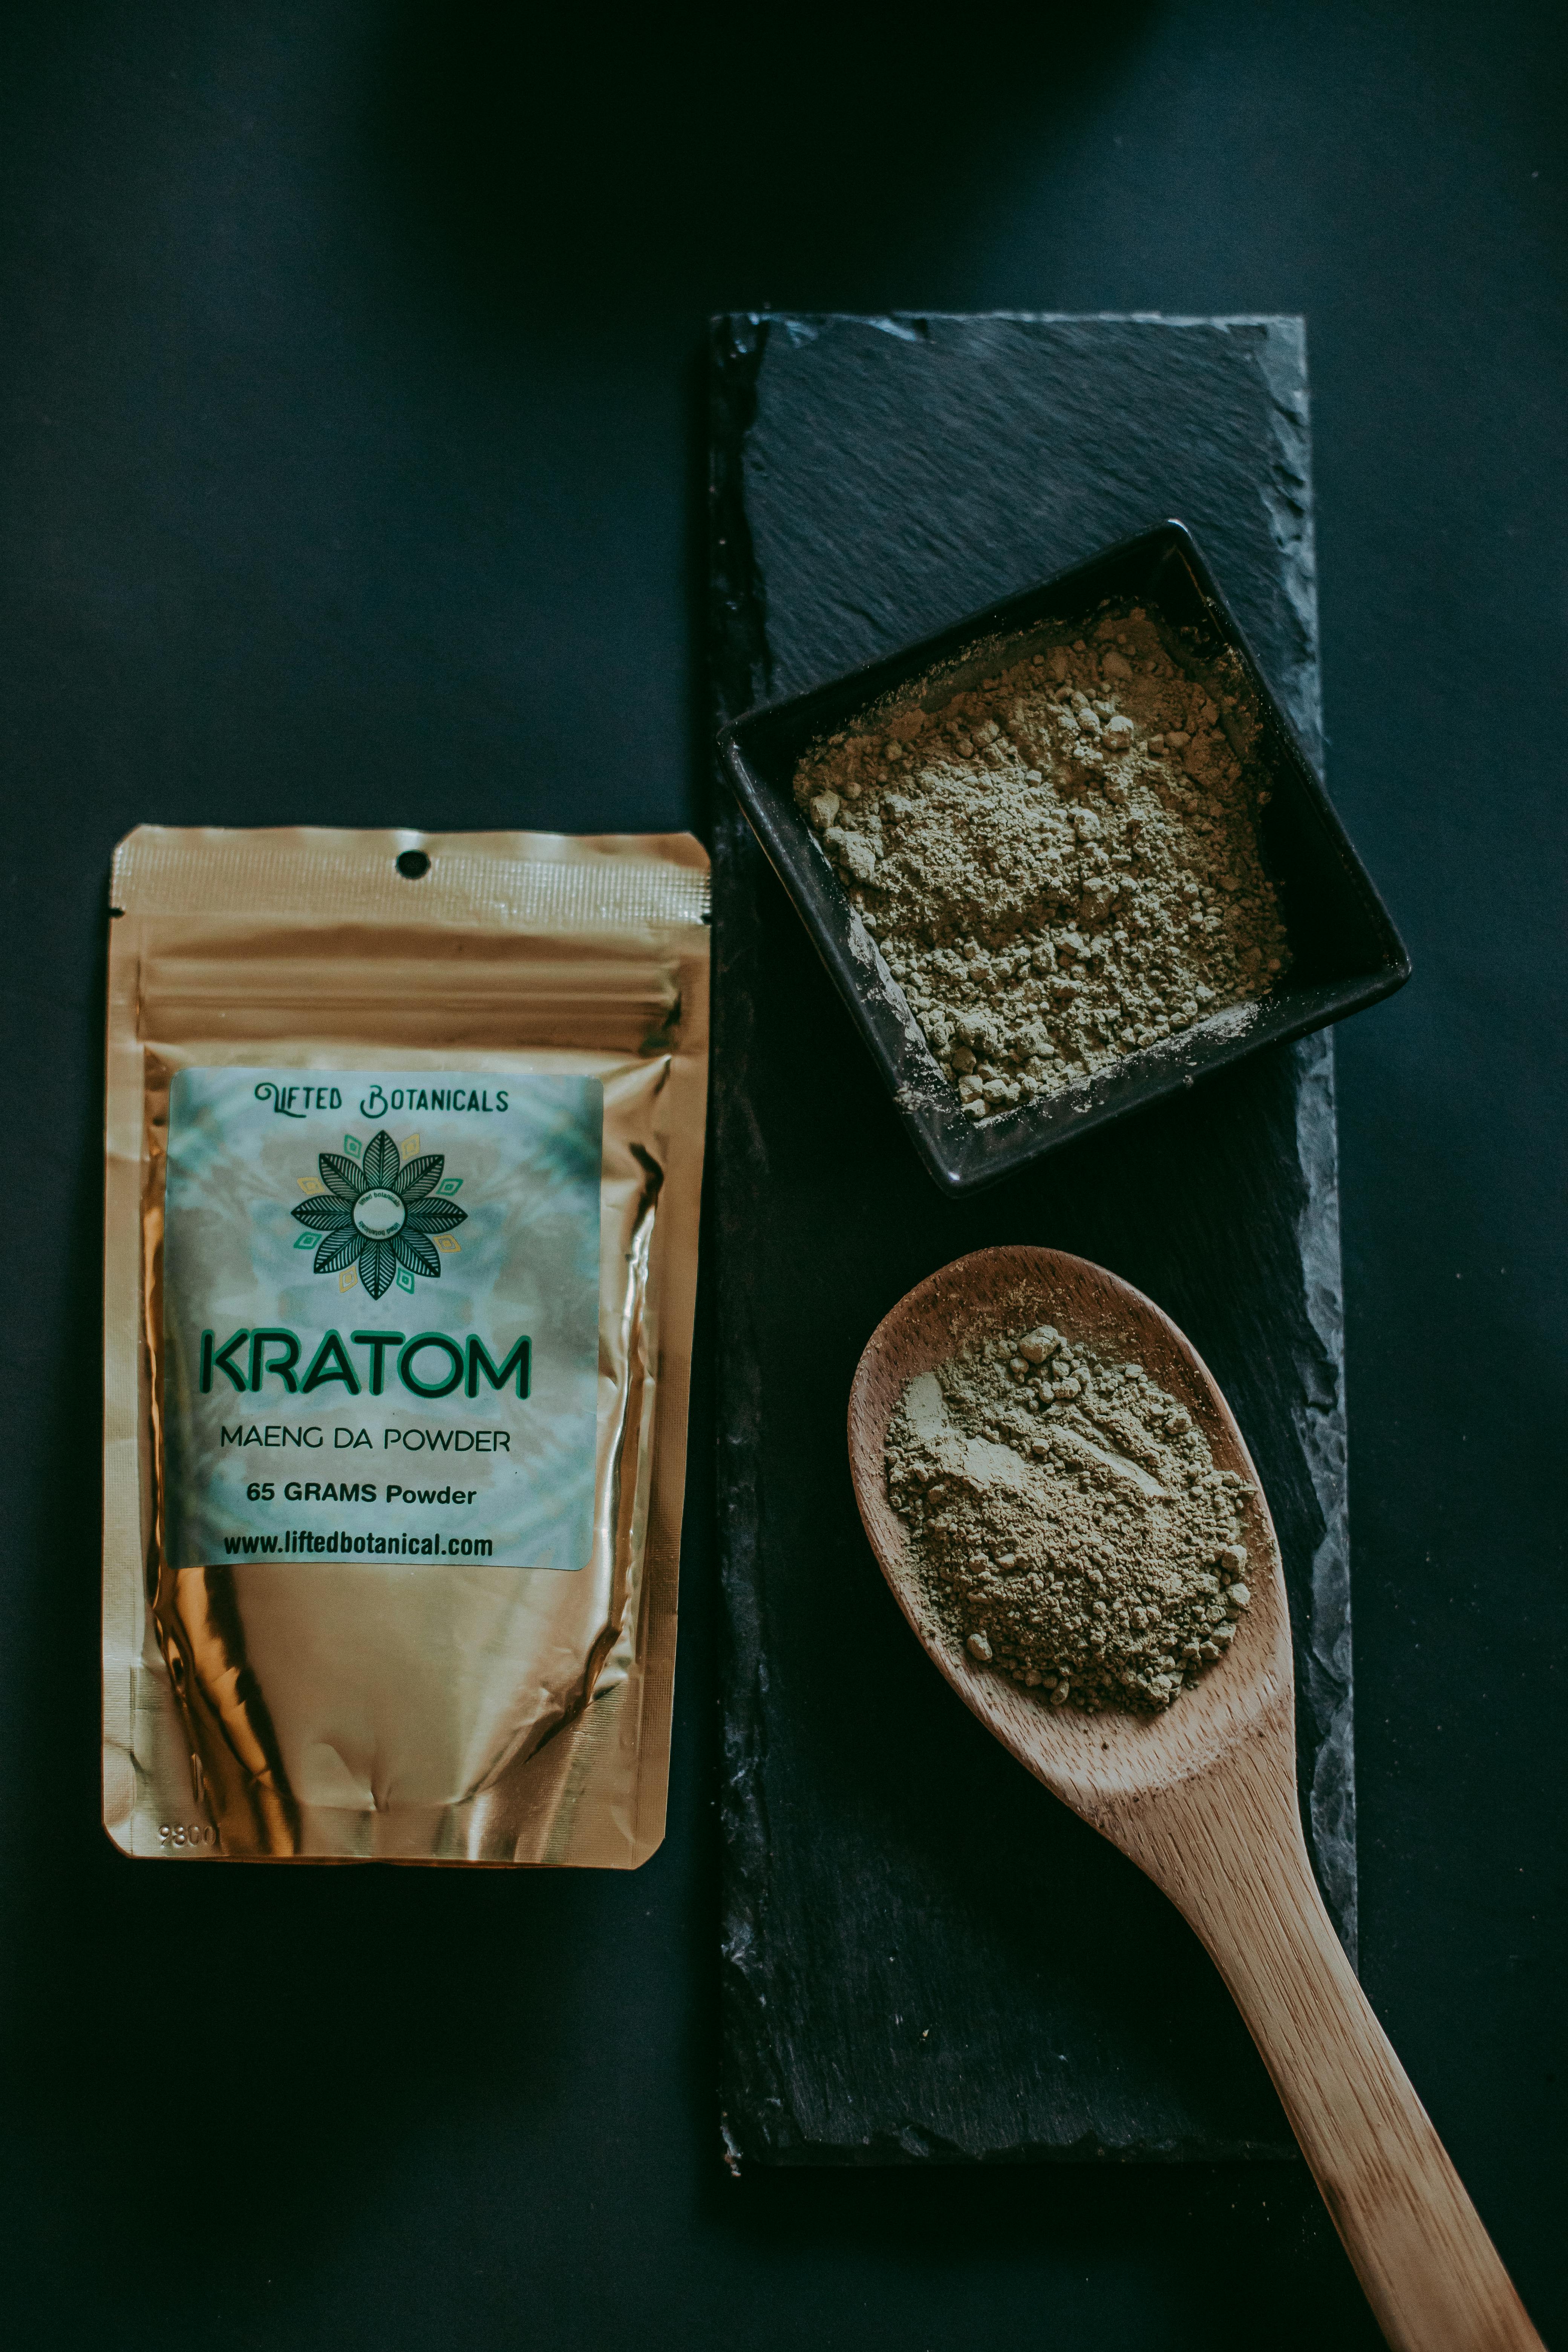 The foundation of kratom in the fashion world